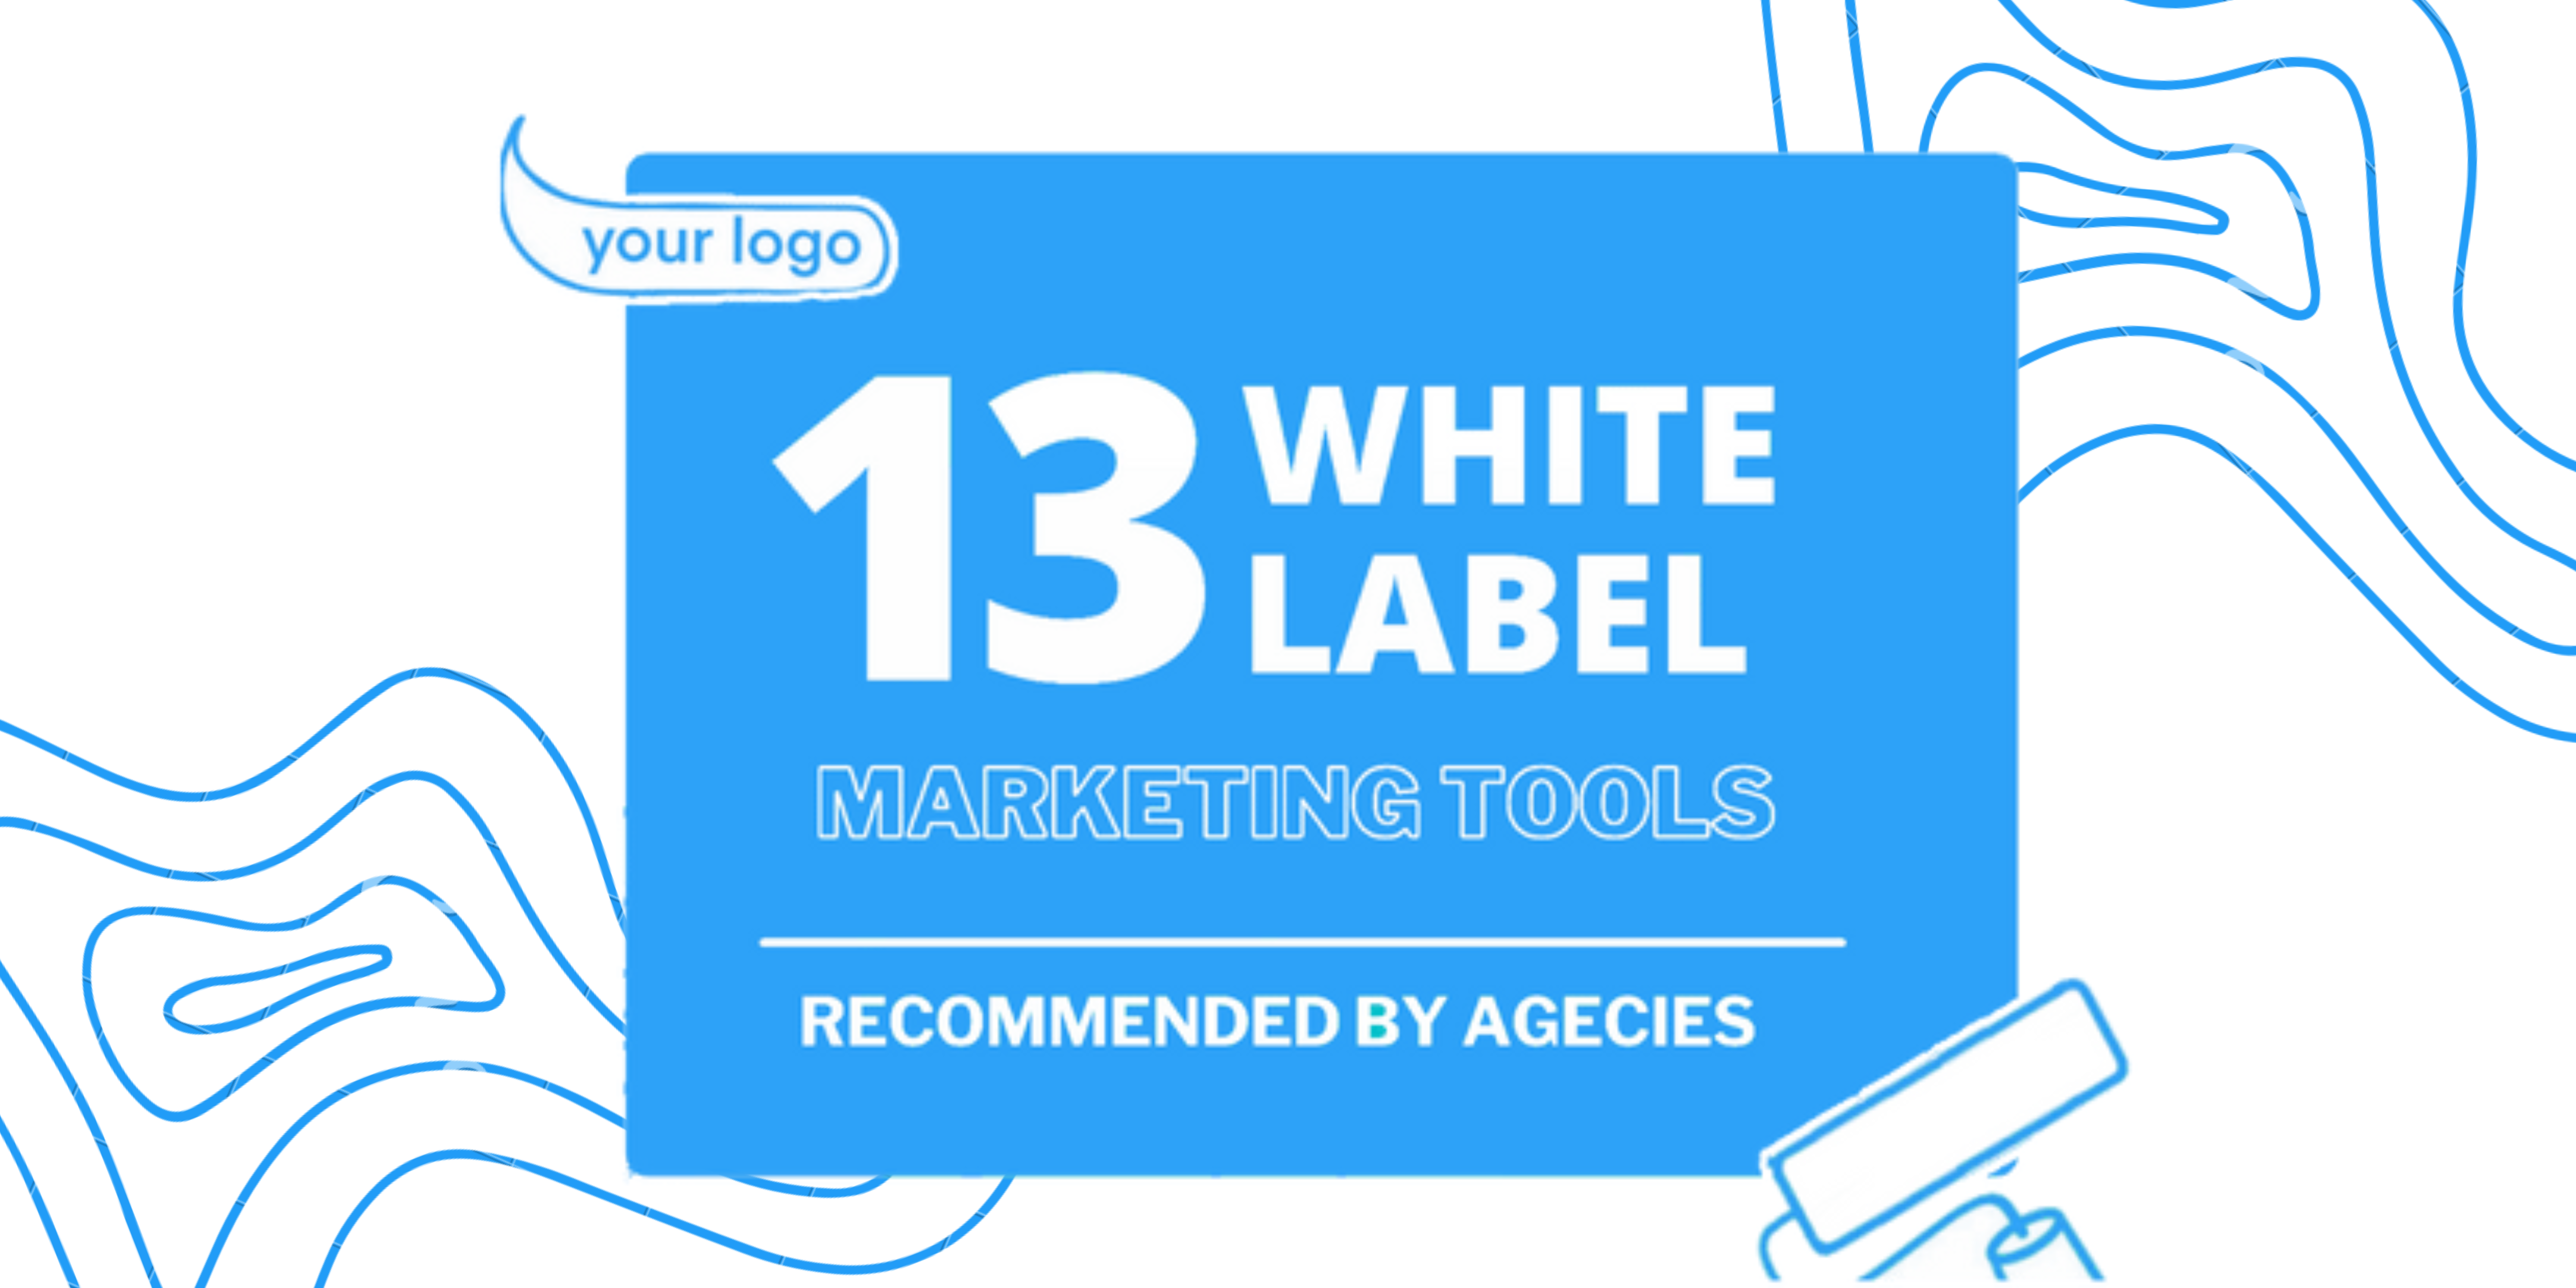 White labels tools set for agencies